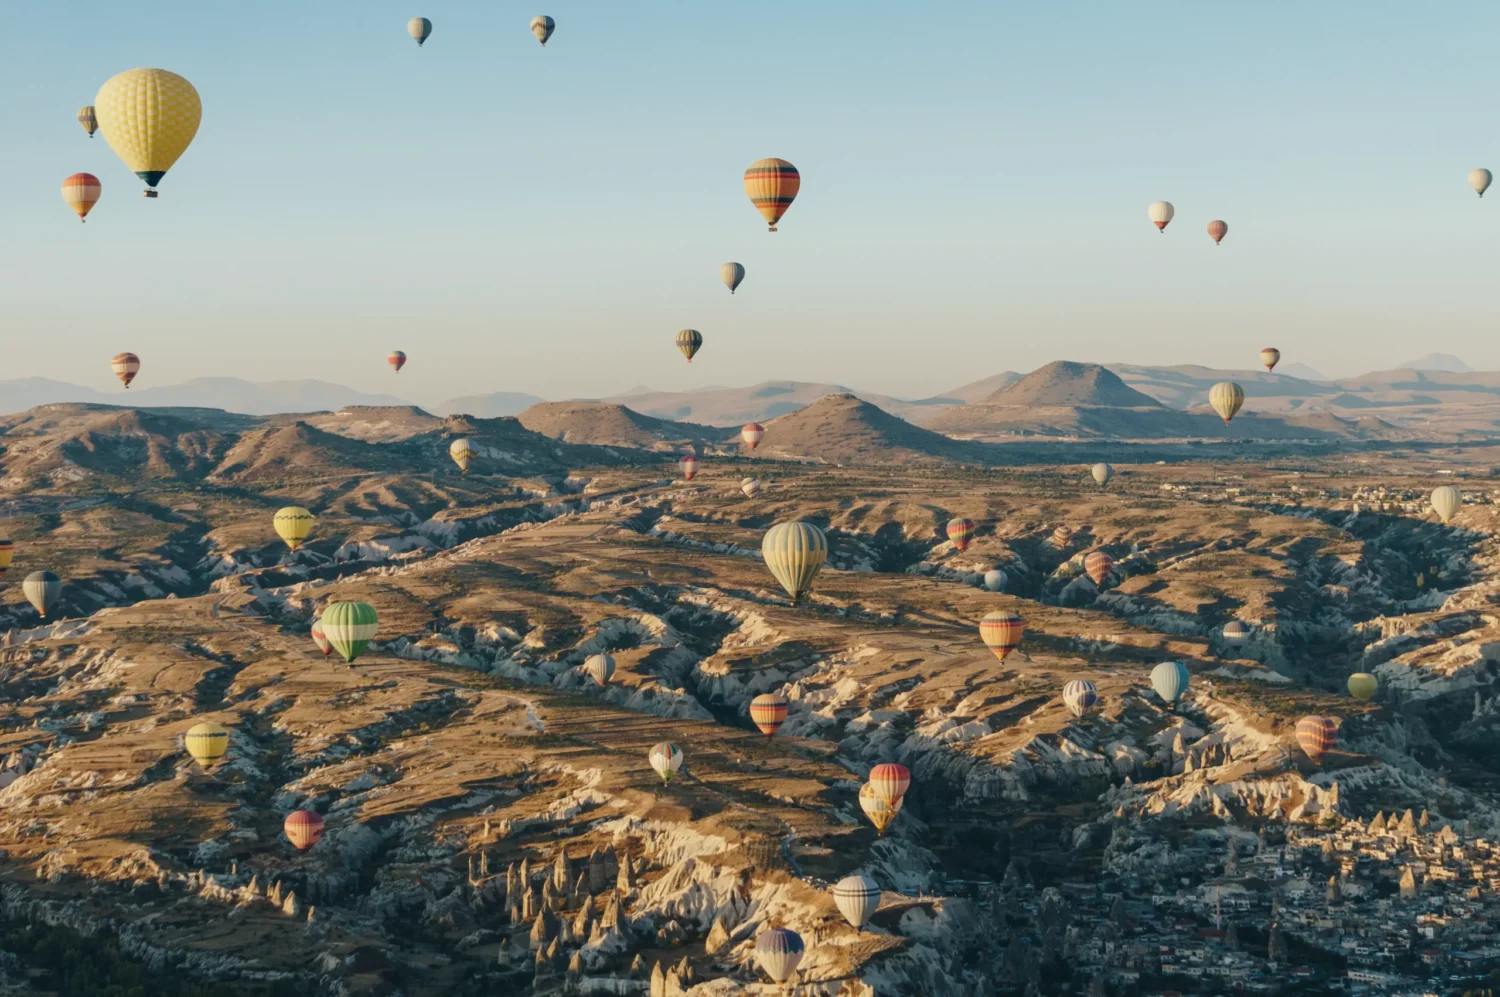 mountain-landscape-with-hot-air-balloons-cappadoc-2022-11-02-03-49-38-utc-scaled